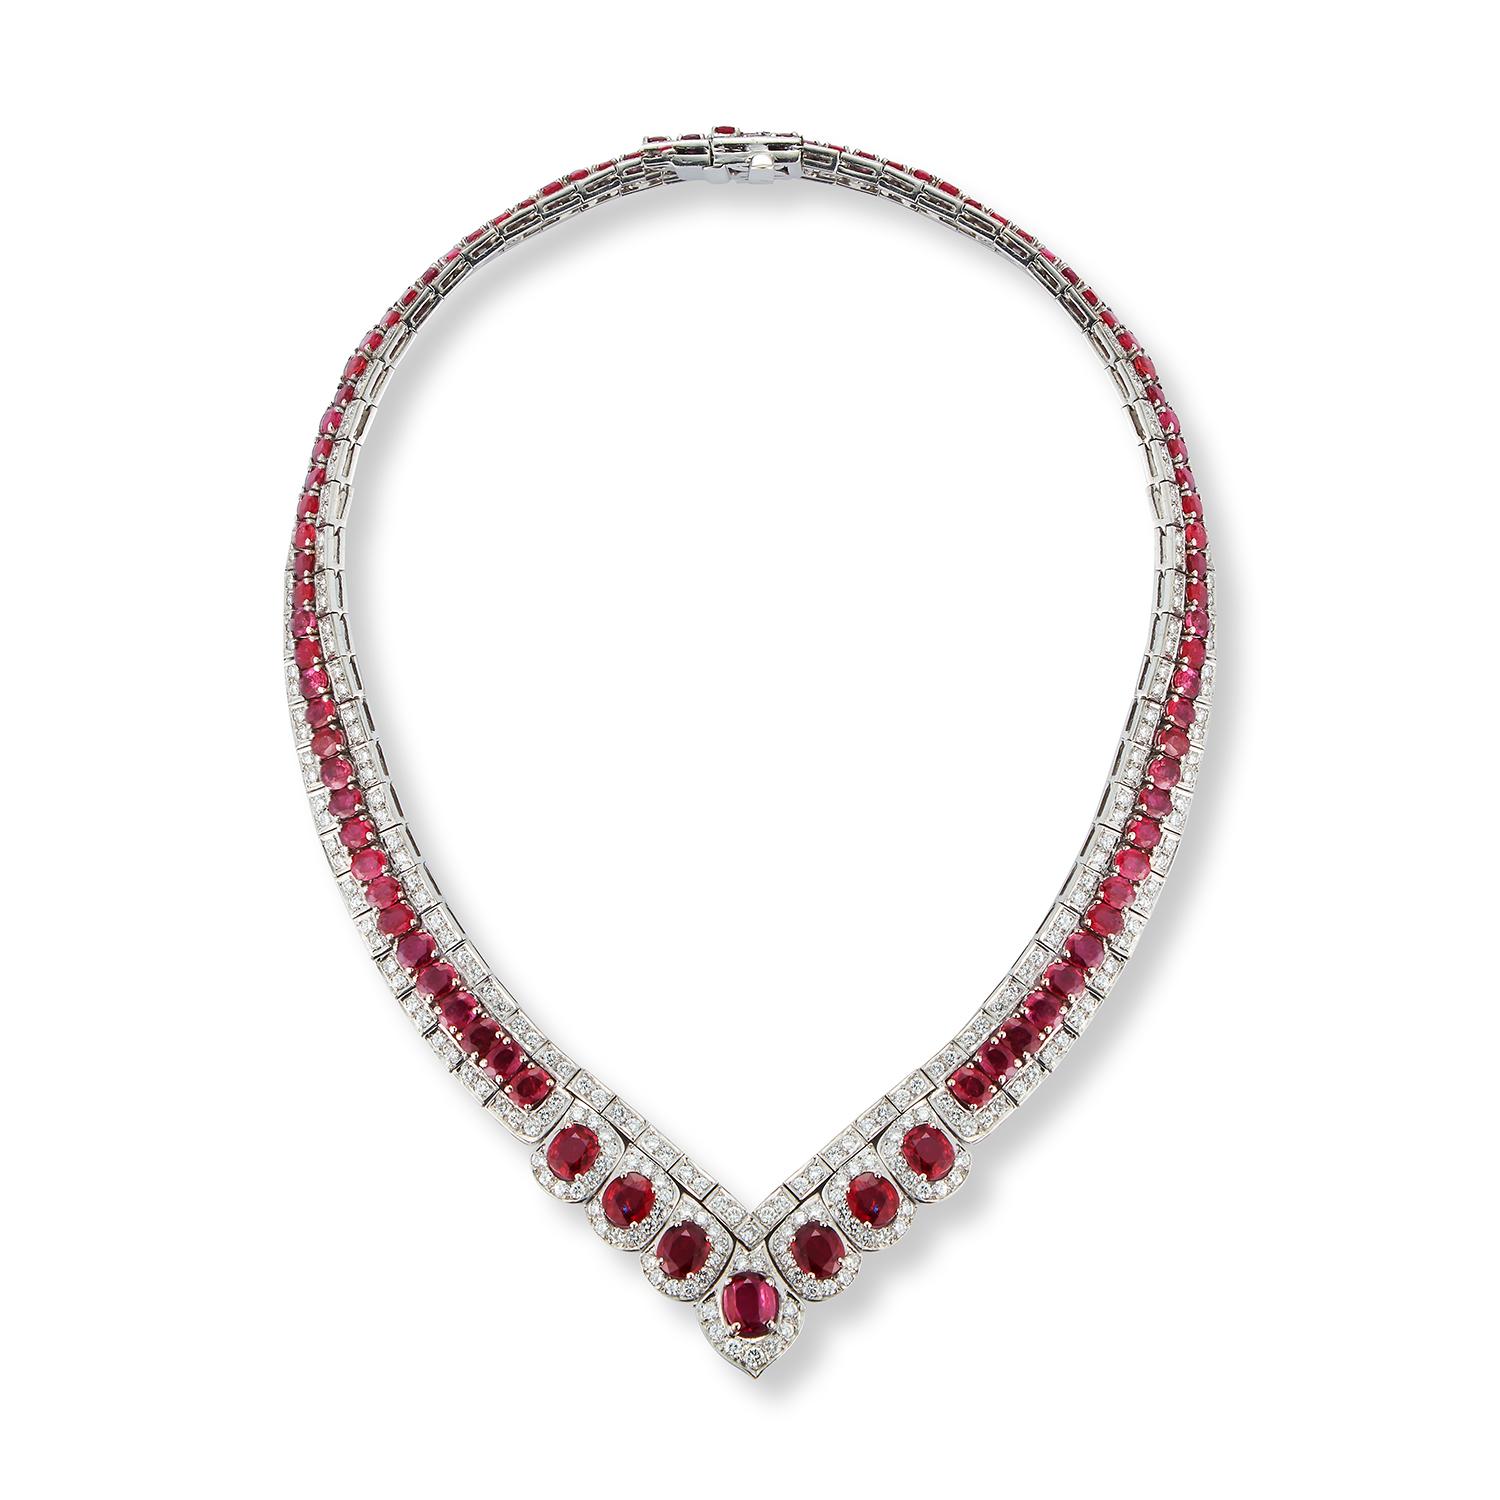 Certified Ruby & Diamond Shaped Necklace
7 larger oval rubies & 86 smaller oval rubies approximately 48.50 Cts 
330 round cut diamonds Weight: approximately 12.50
Measurements: 14